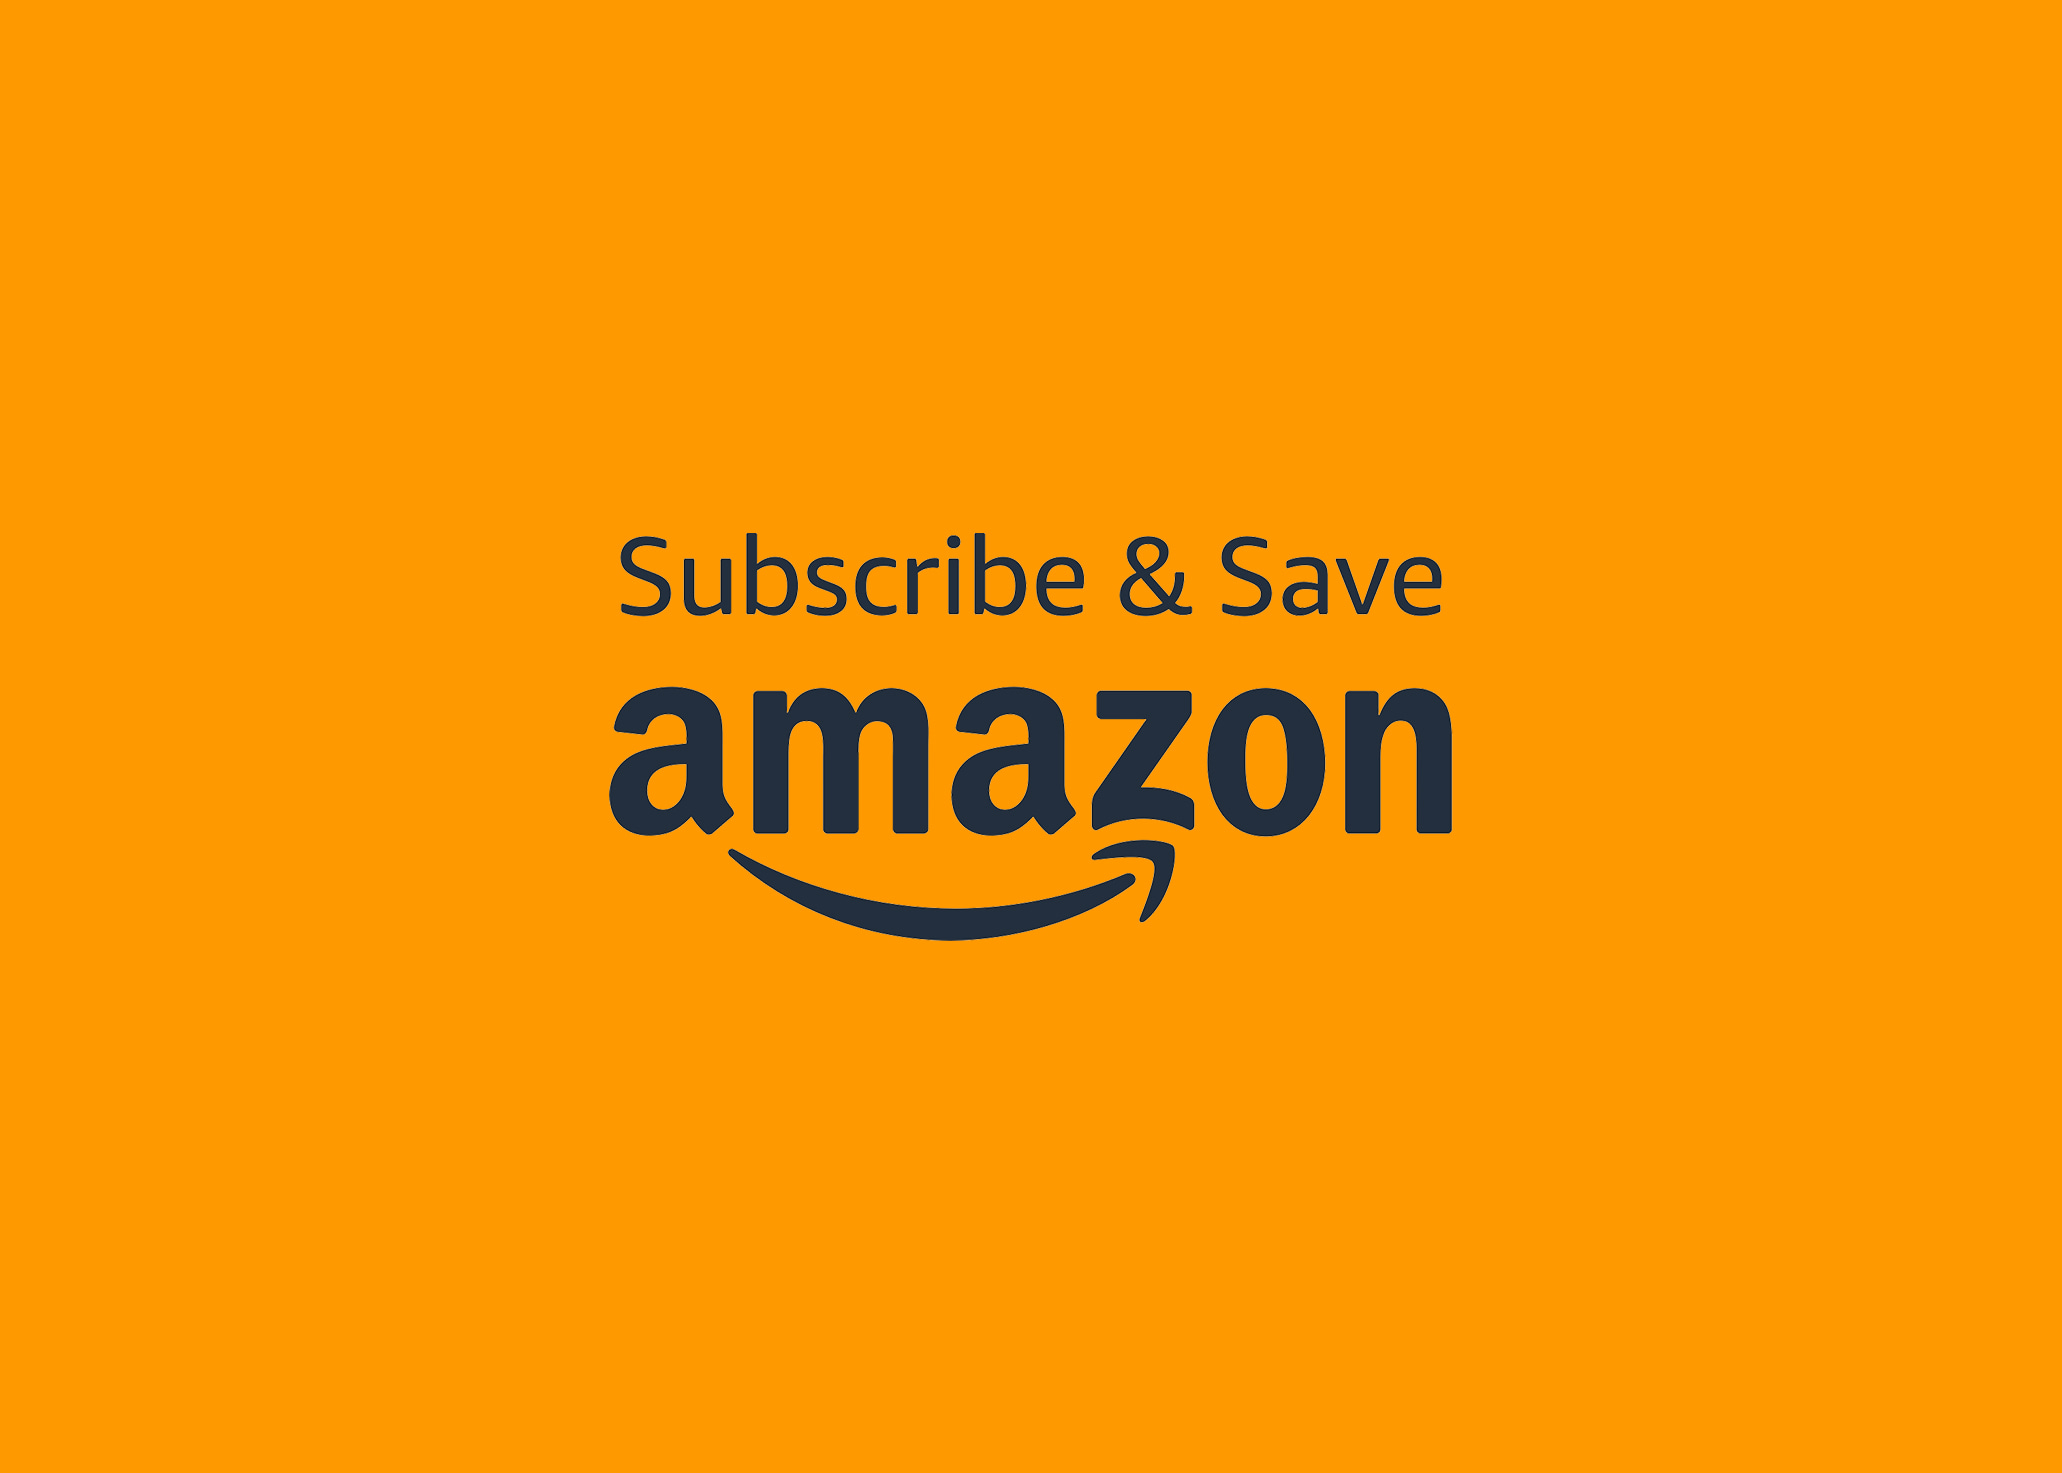 Subscribe & Save on Amazon